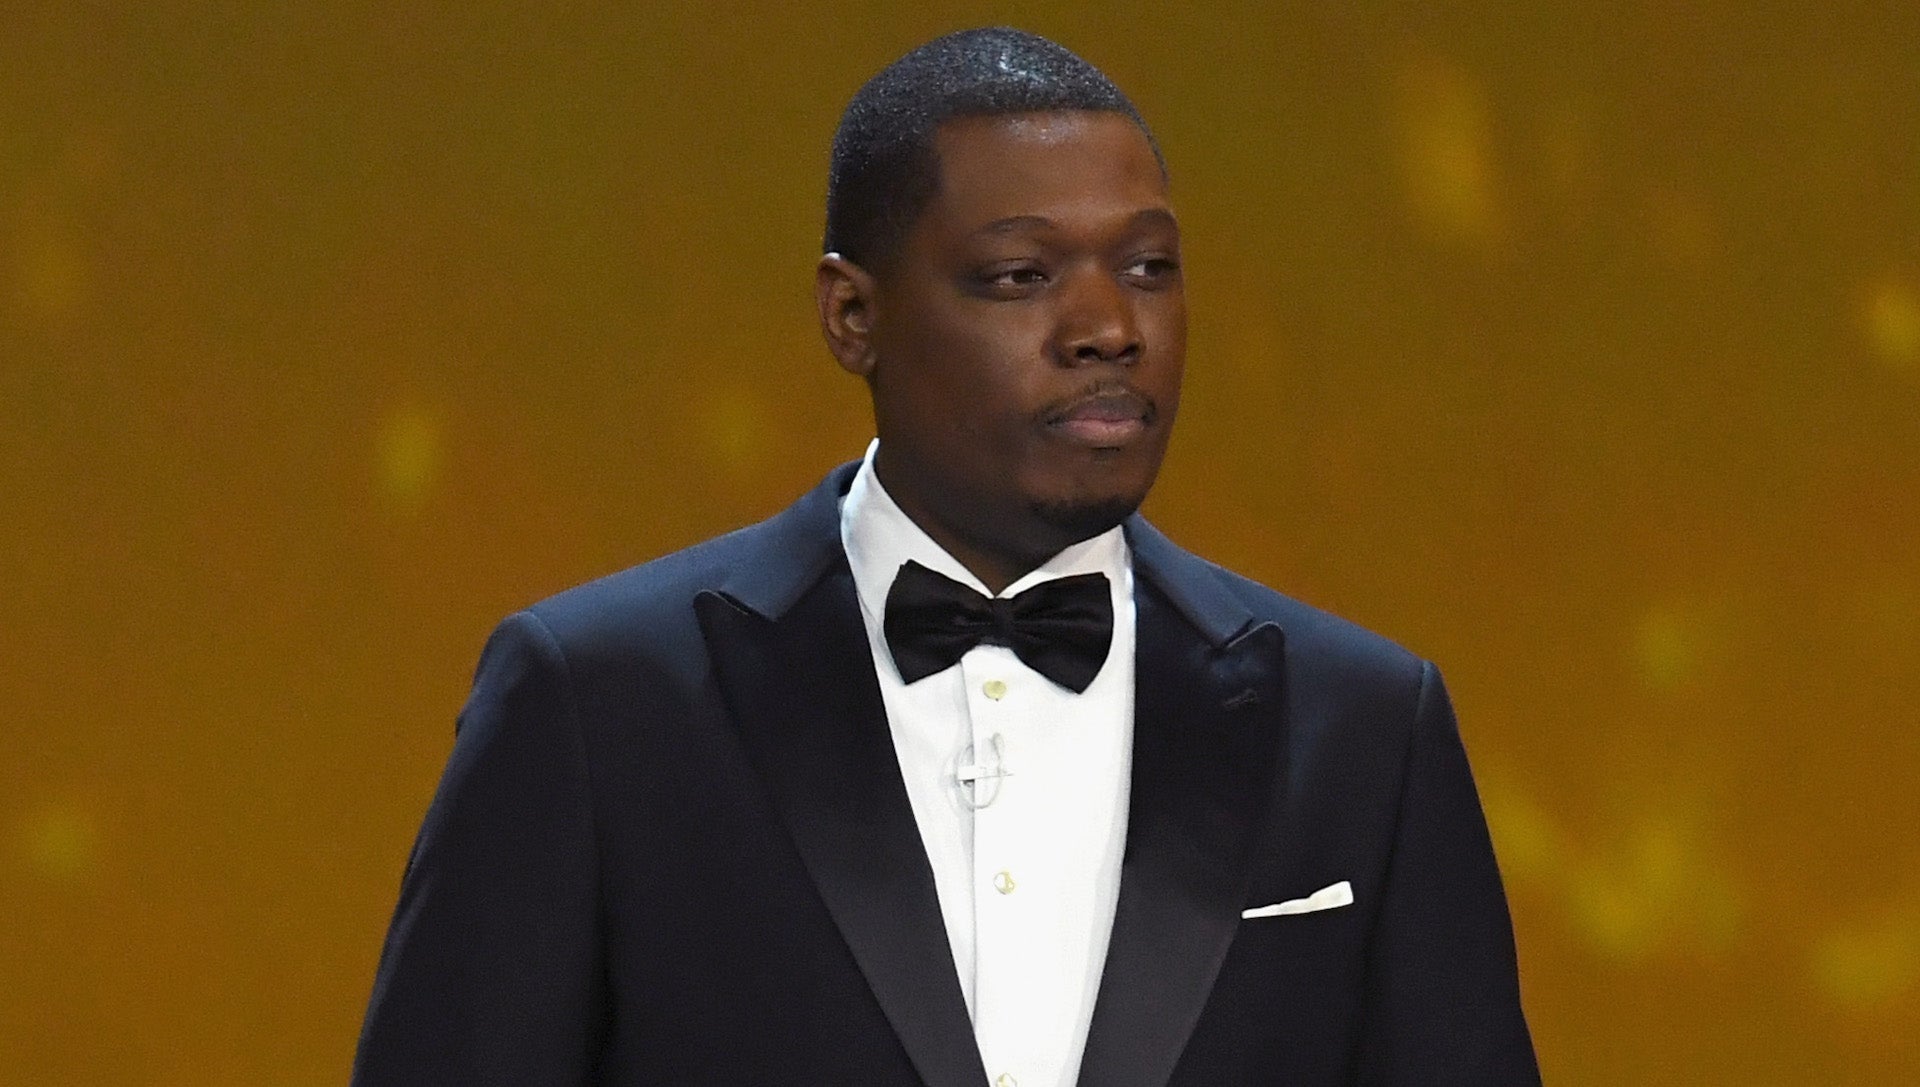 Michael Che’s Grandmother Dies From COVID-19